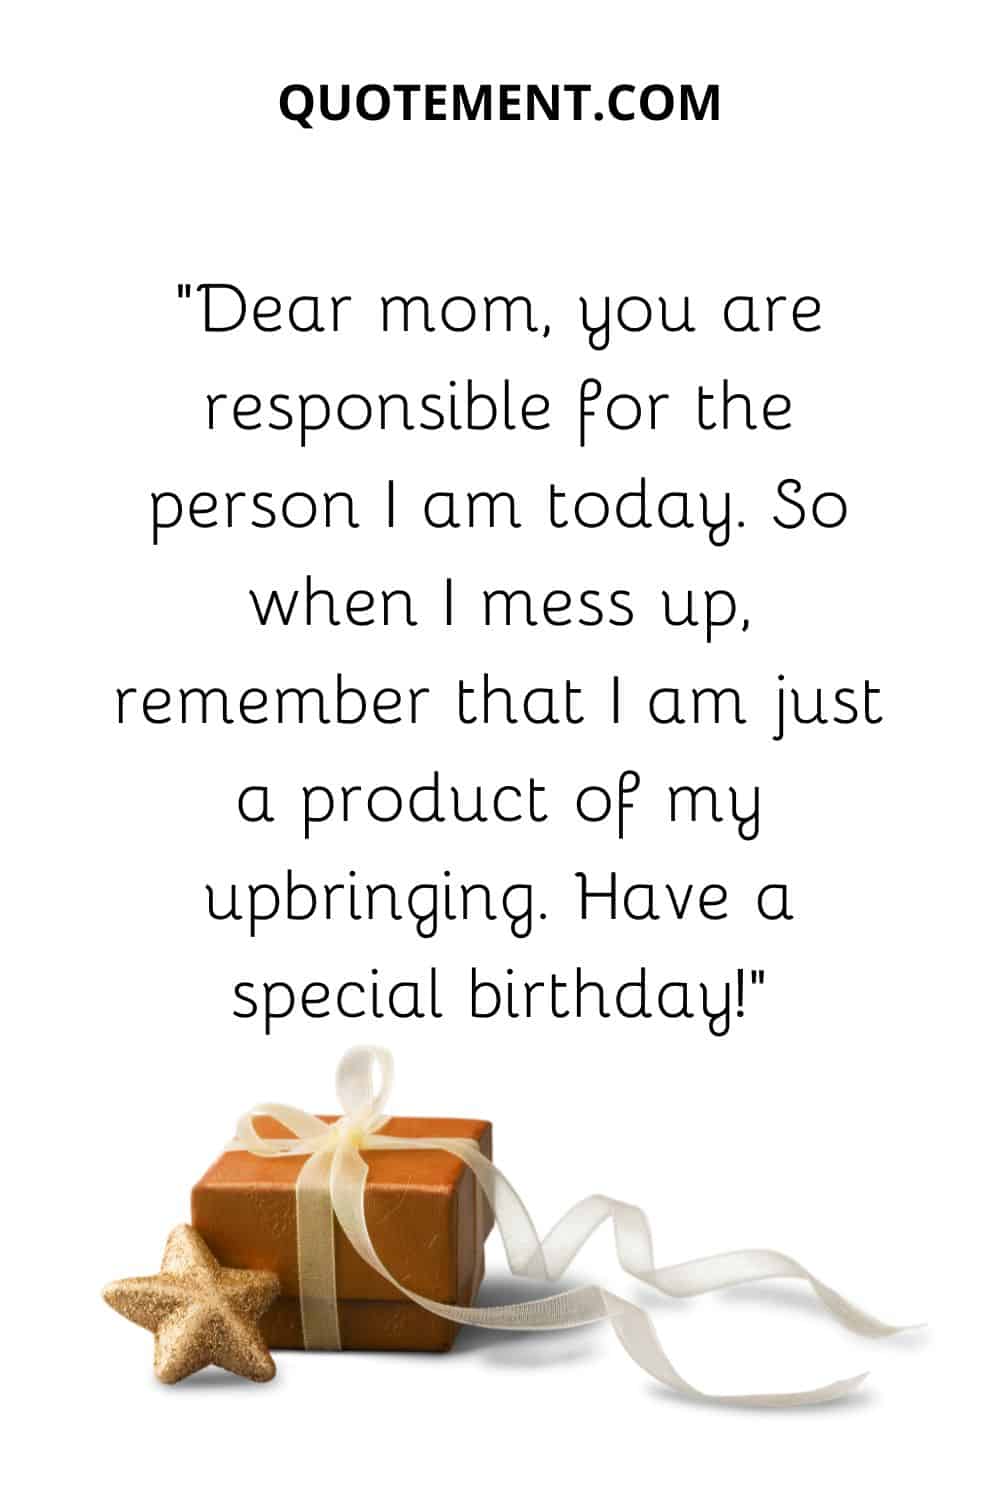 Dear mom, you are responsible for the person I am today